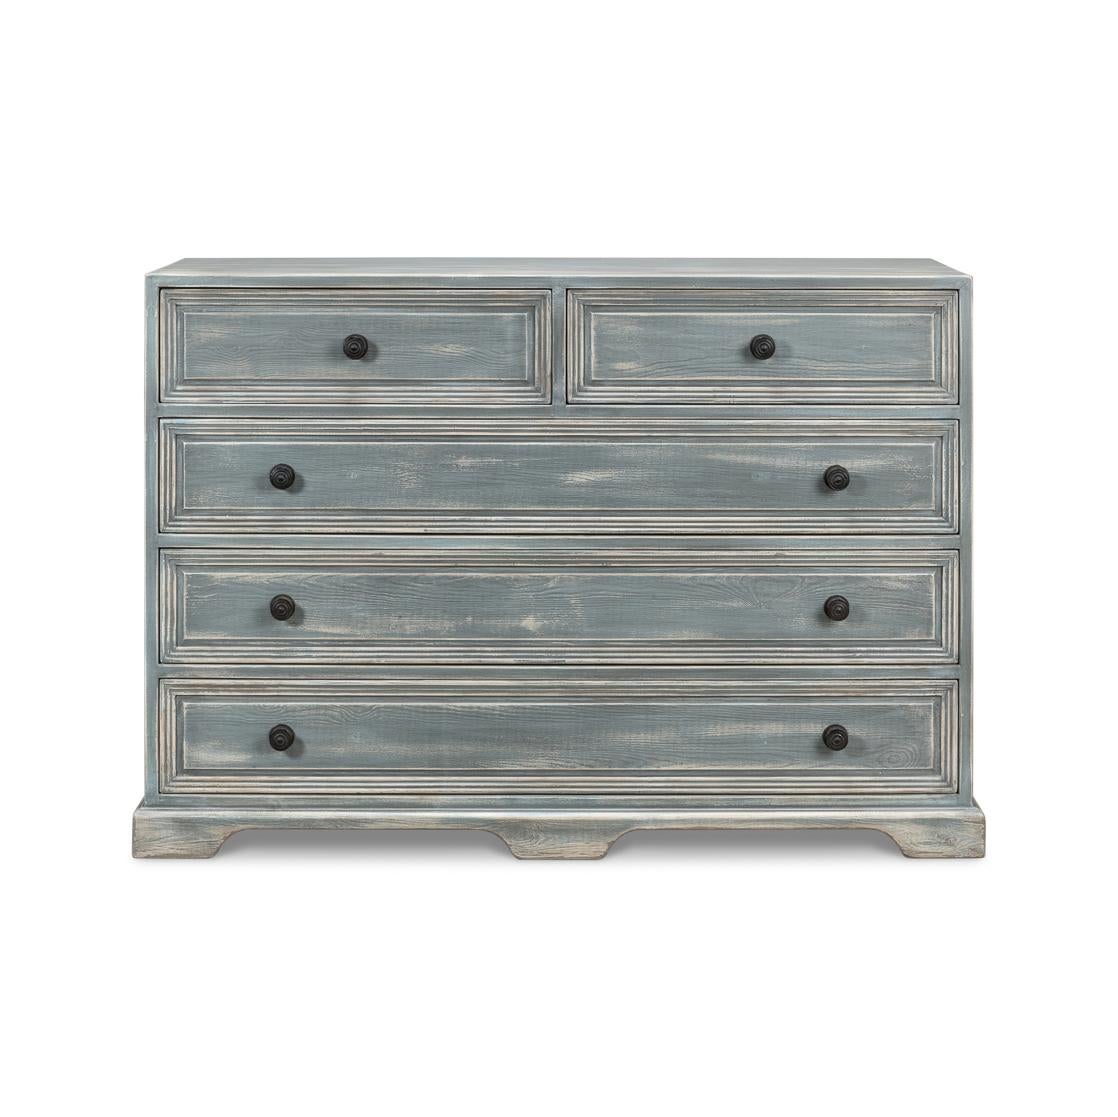 Where the serene hues of the seaside meet the rustic charm of a weathered finish. Providing abundant storage with five self-closing drawers. Constructed of fine pine, finished in a Blue-Grey and adorned with hand-crafted hardware, it is the perfect